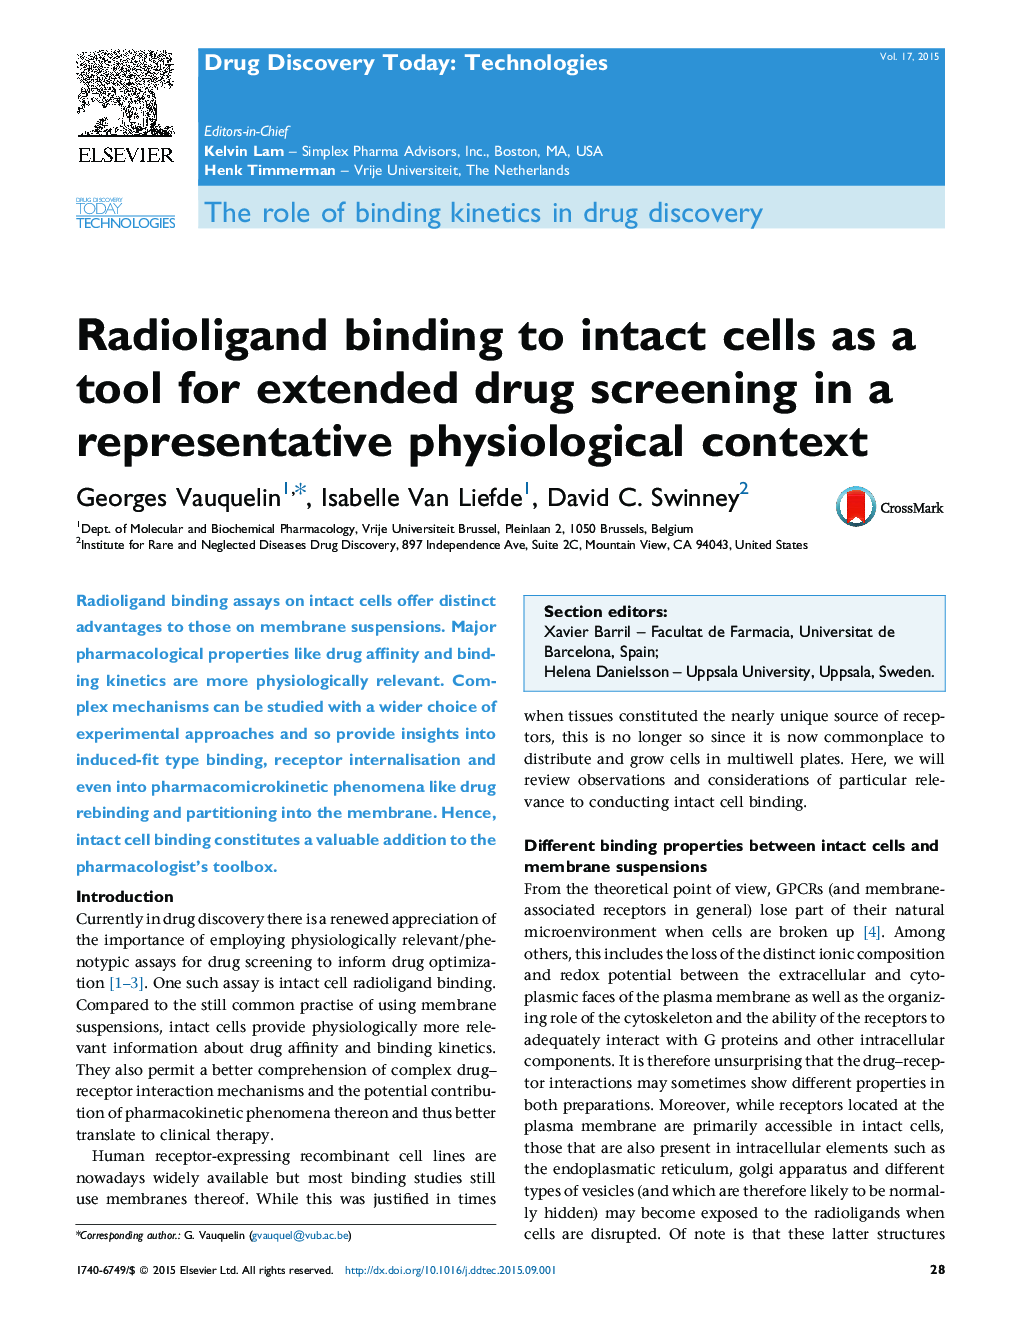 Radioligand binding to intact cells as a tool for extended drug screening in a representative physiological context